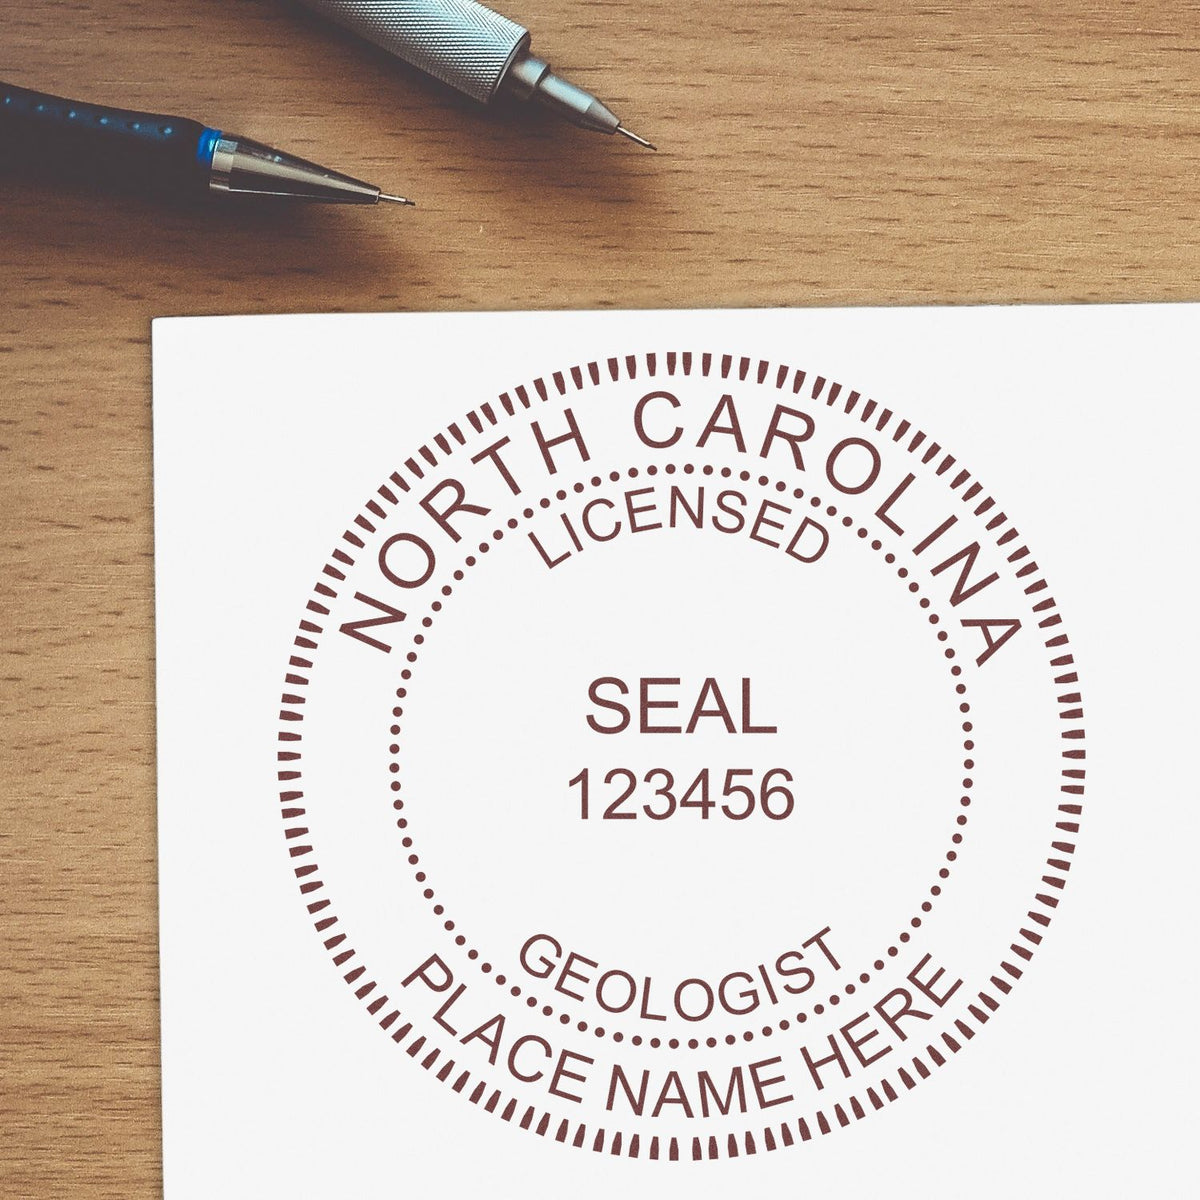 The Self-Inking North Carolina Geologist Stamp stamp impression comes to life with a crisp, detailed image stamped on paper - showcasing true professional quality.